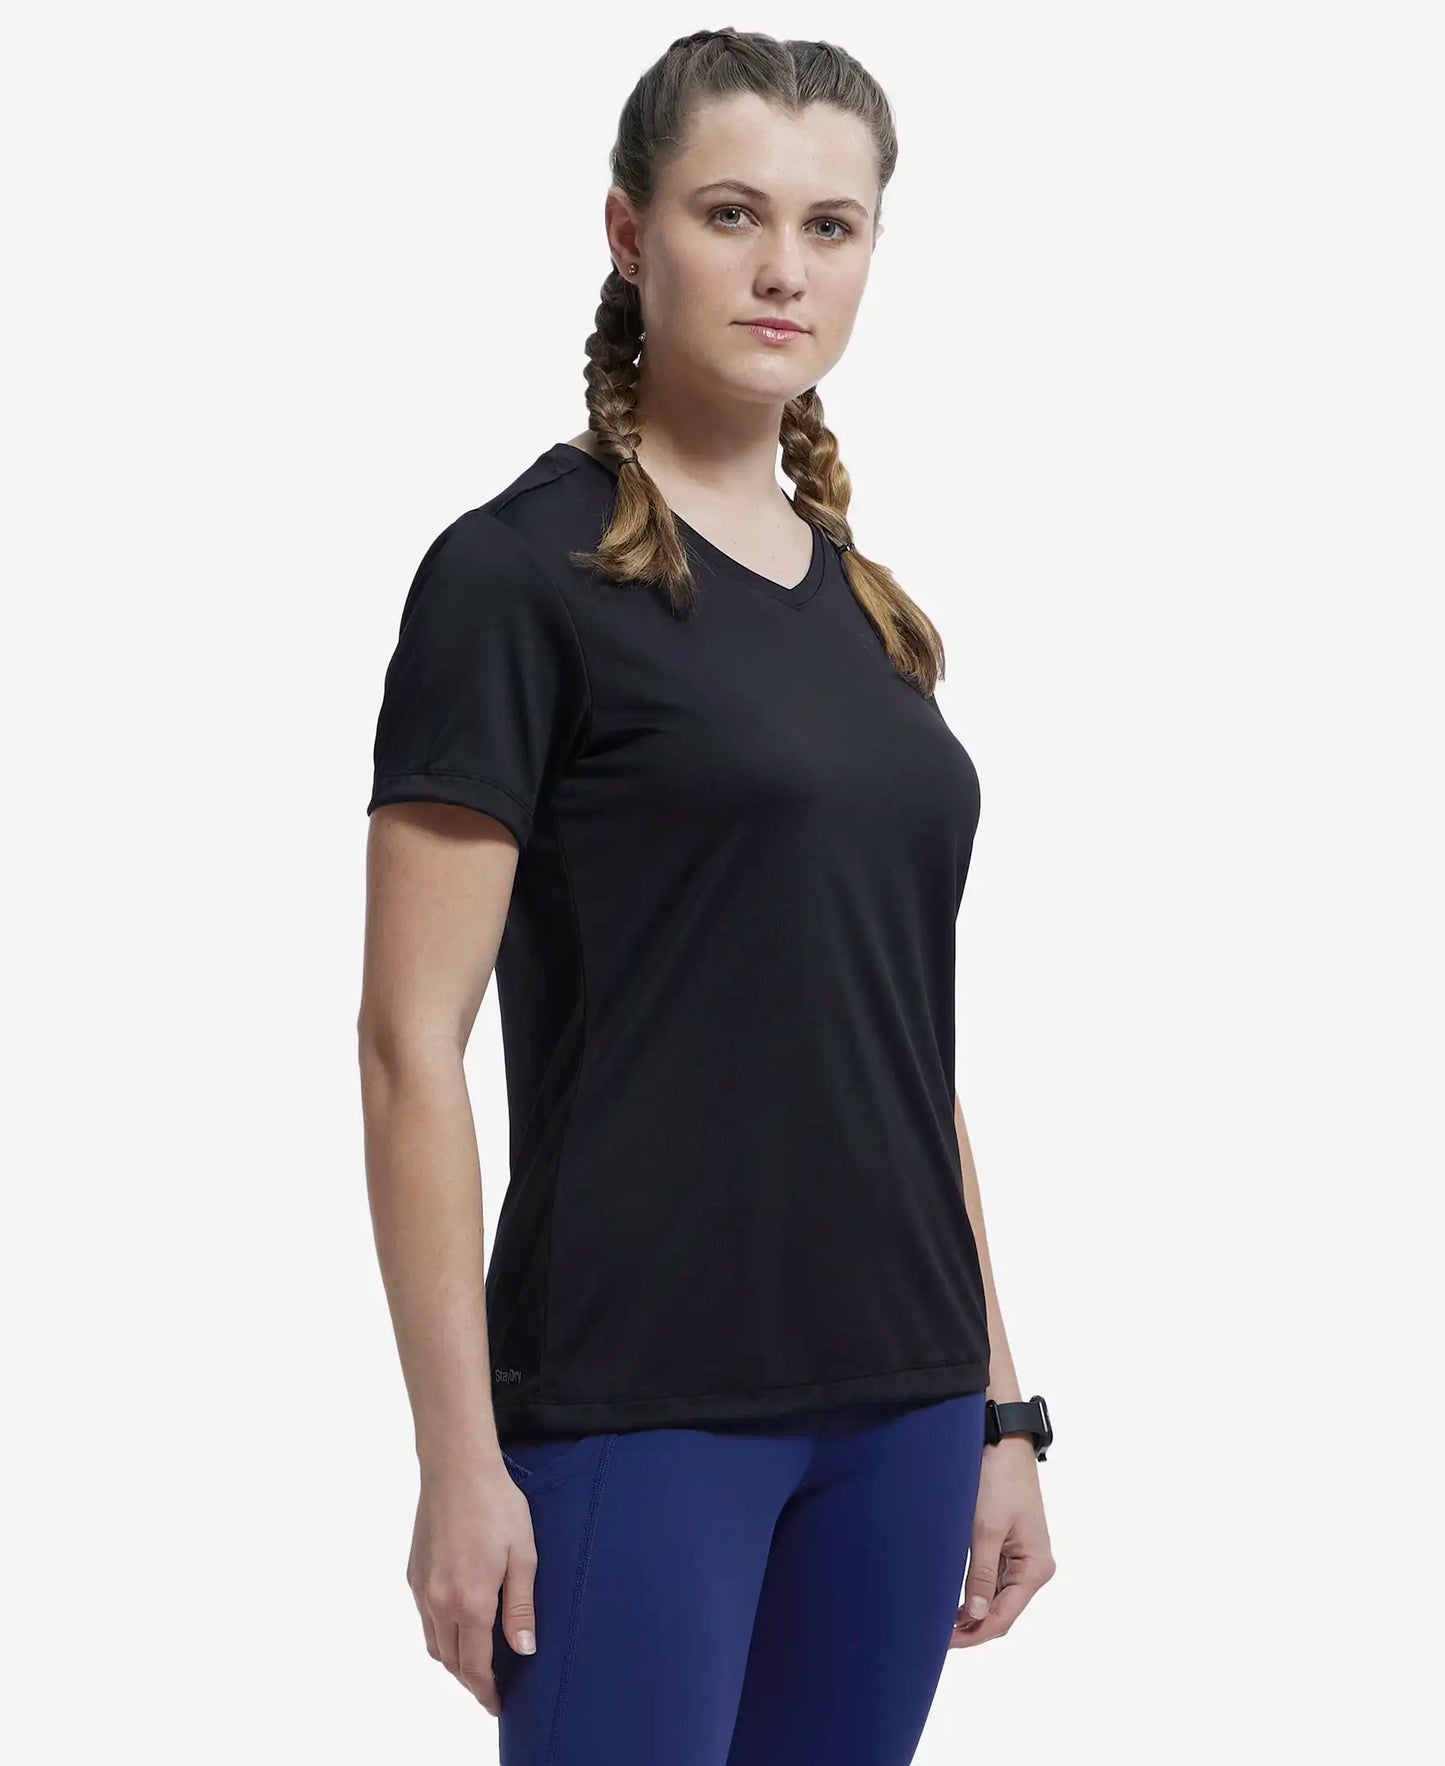 Microfiber Fabric Relaxed Fit Solid V Neck Half Sleeve Performance T-Shirt - Black-2